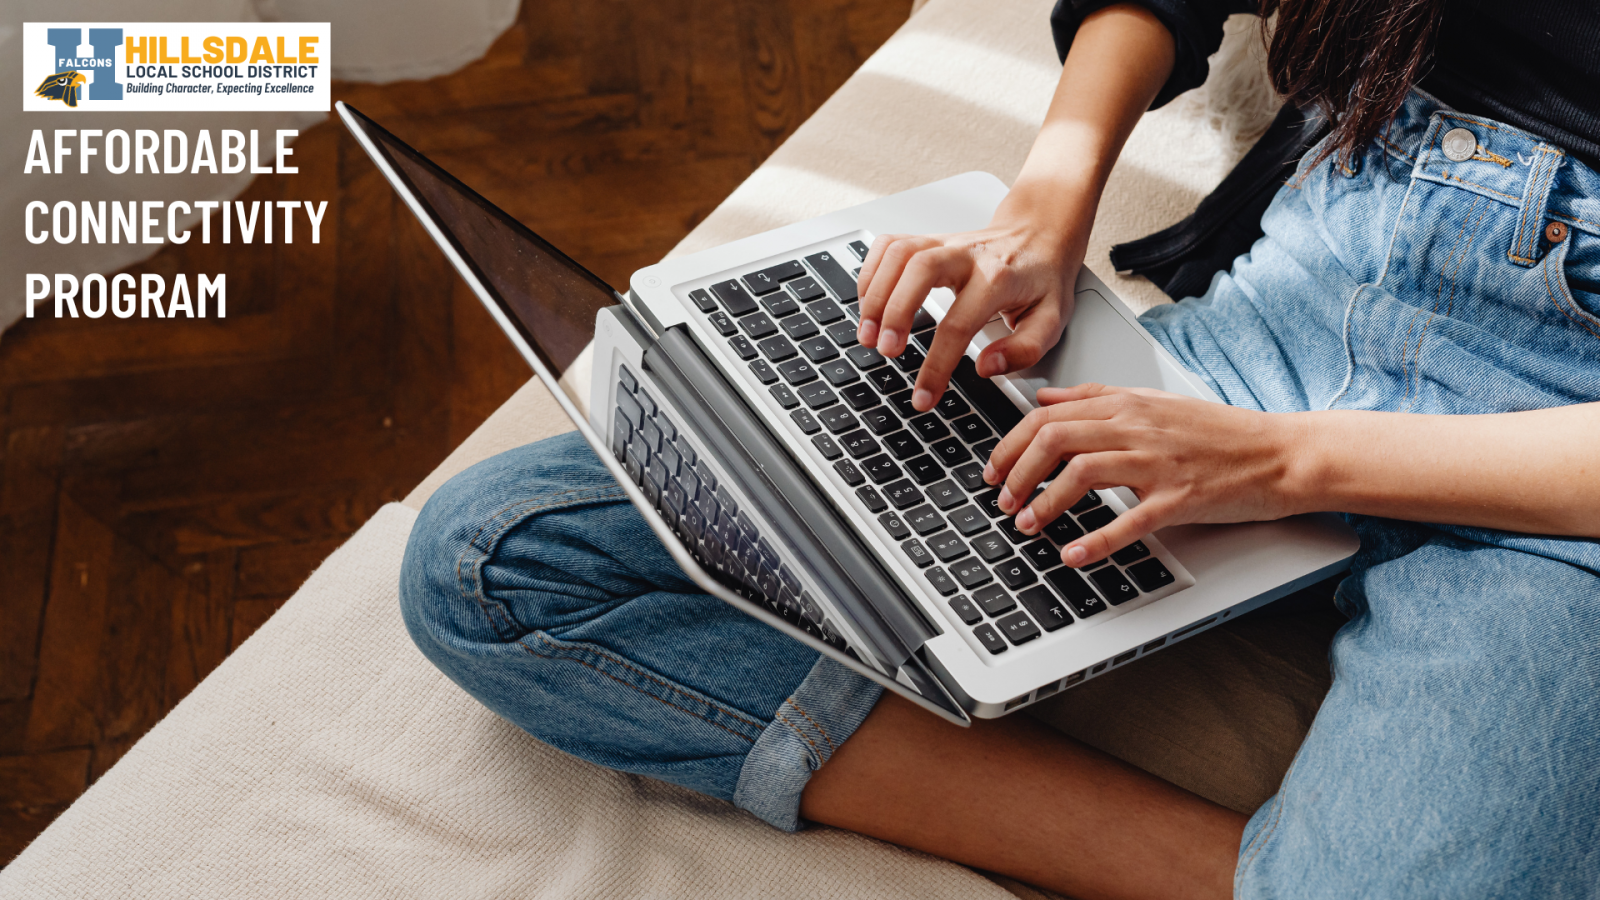 An image of an individual typing on a laptop while sitting on a couch.